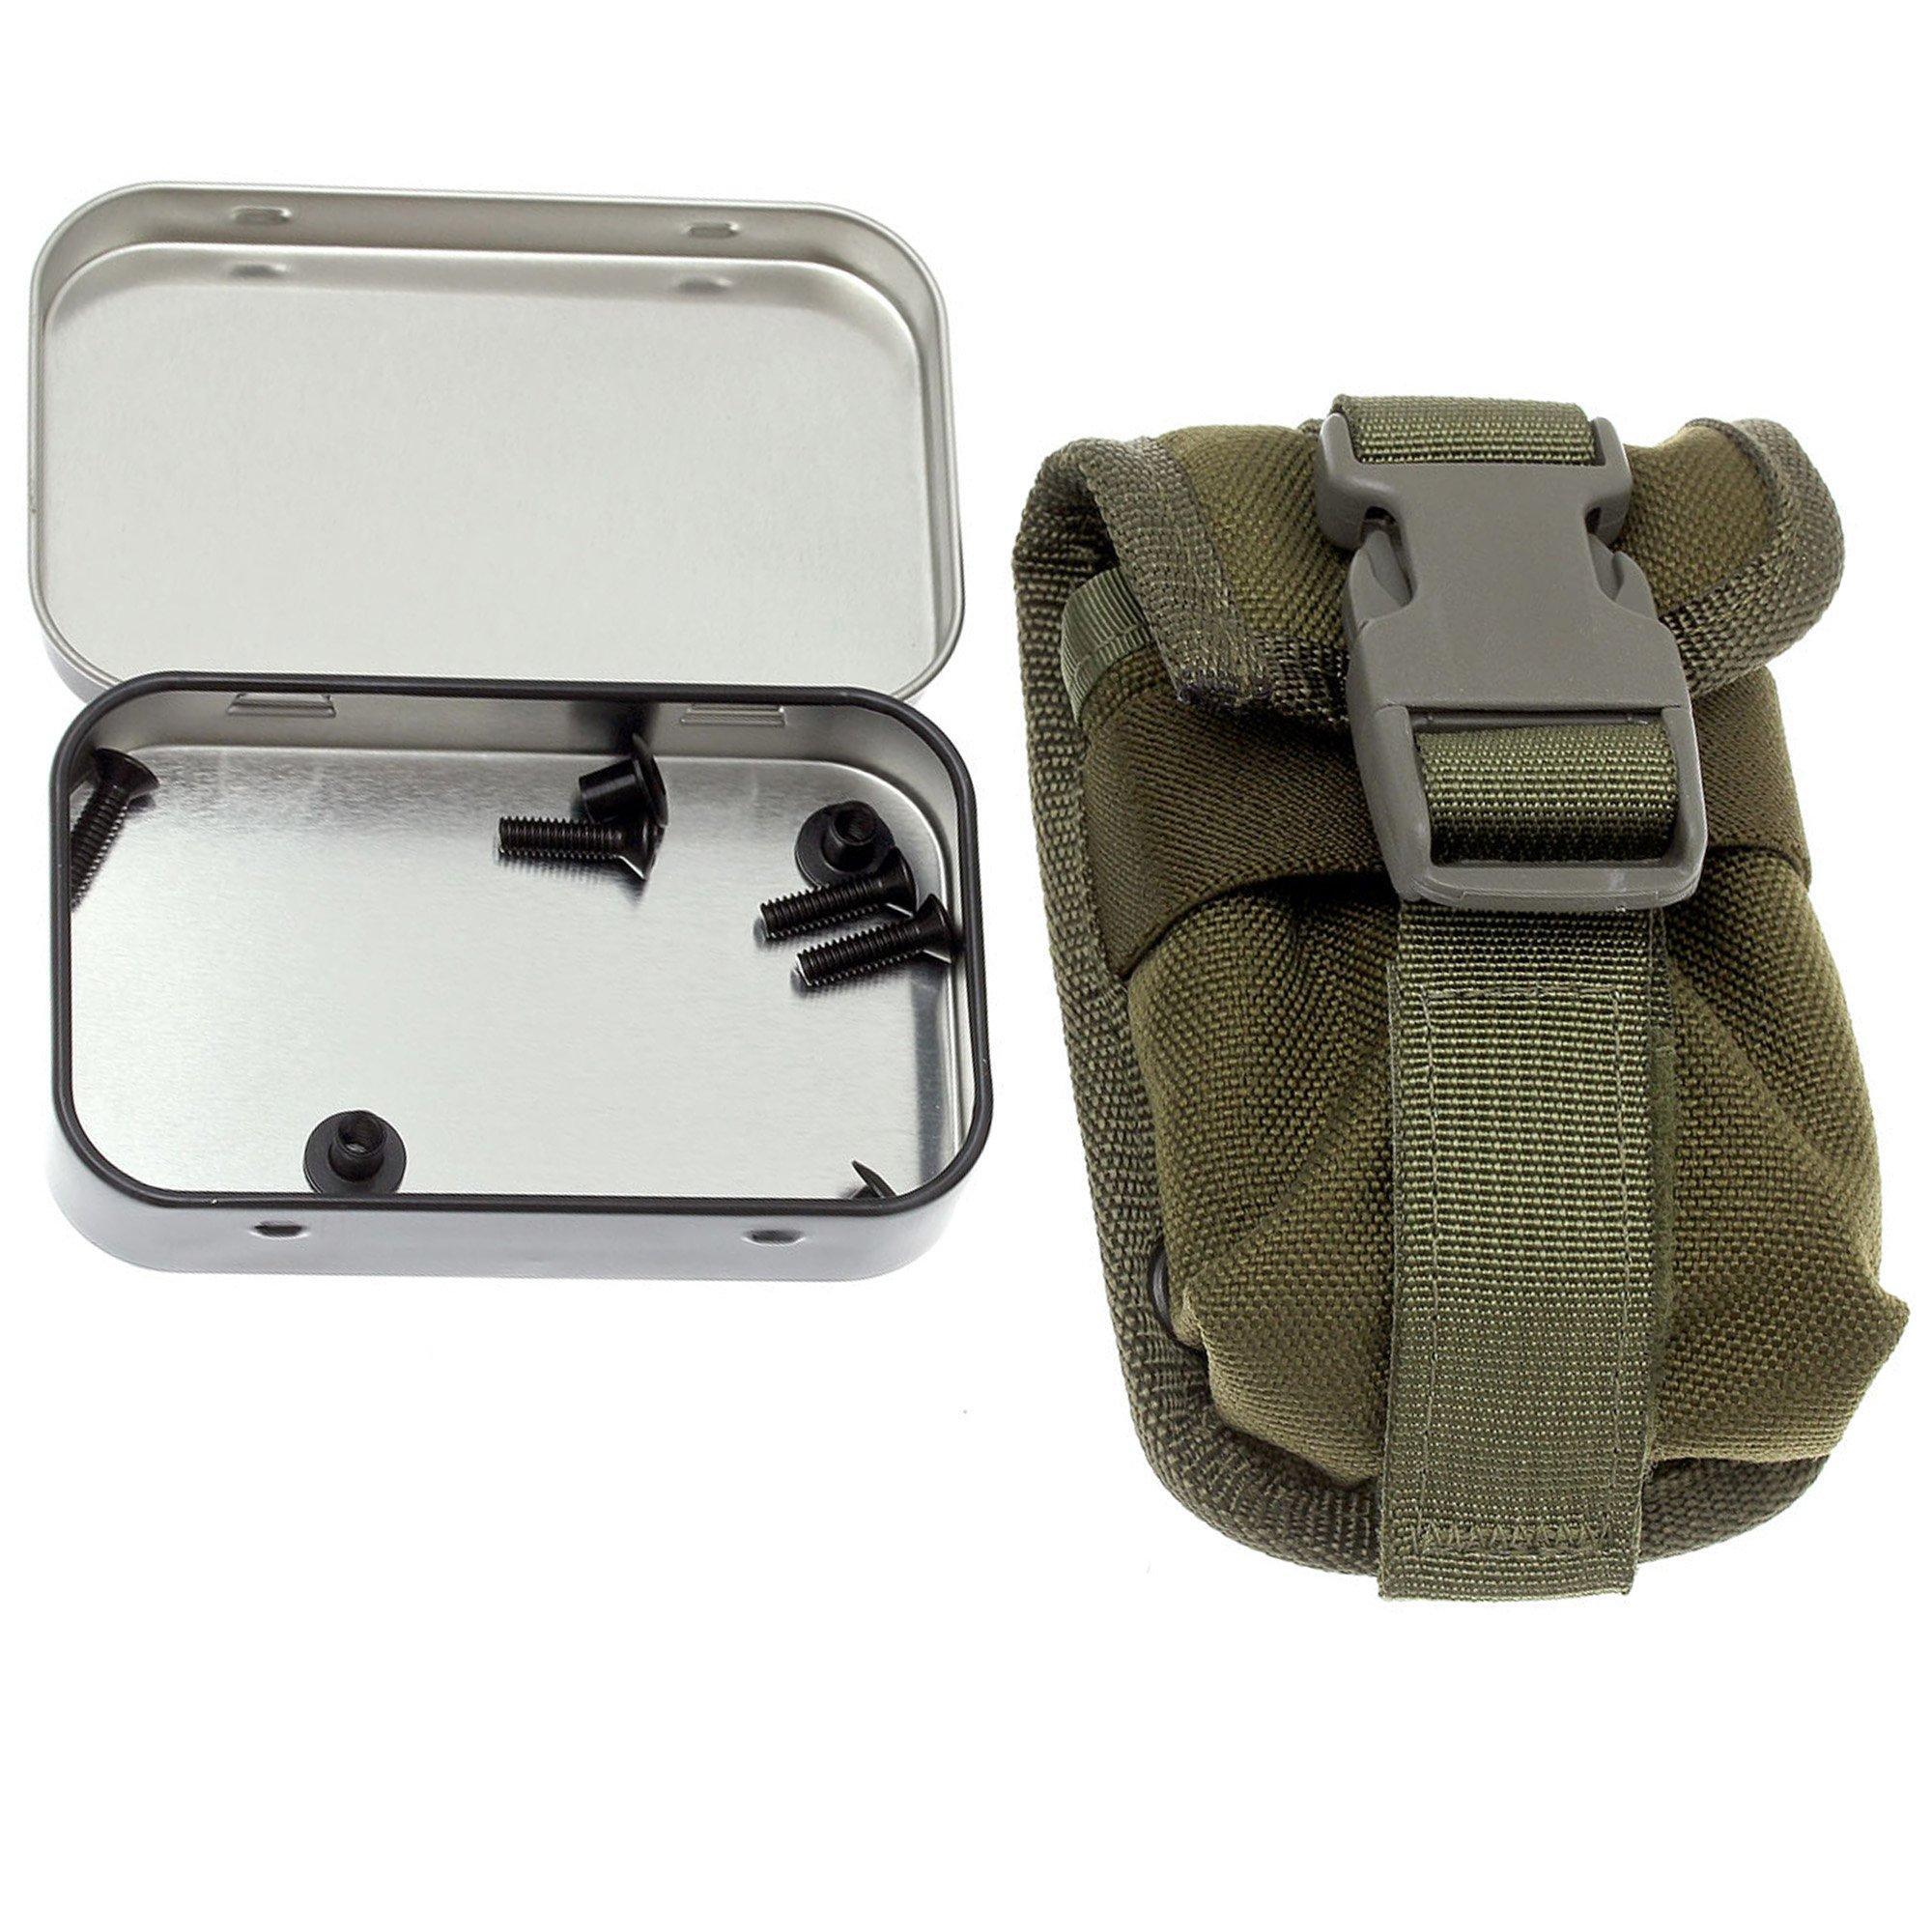 ESEE ESEE Accessoire Pouch voor Model 5 & 6, 52-OD POUCH, OD-Green